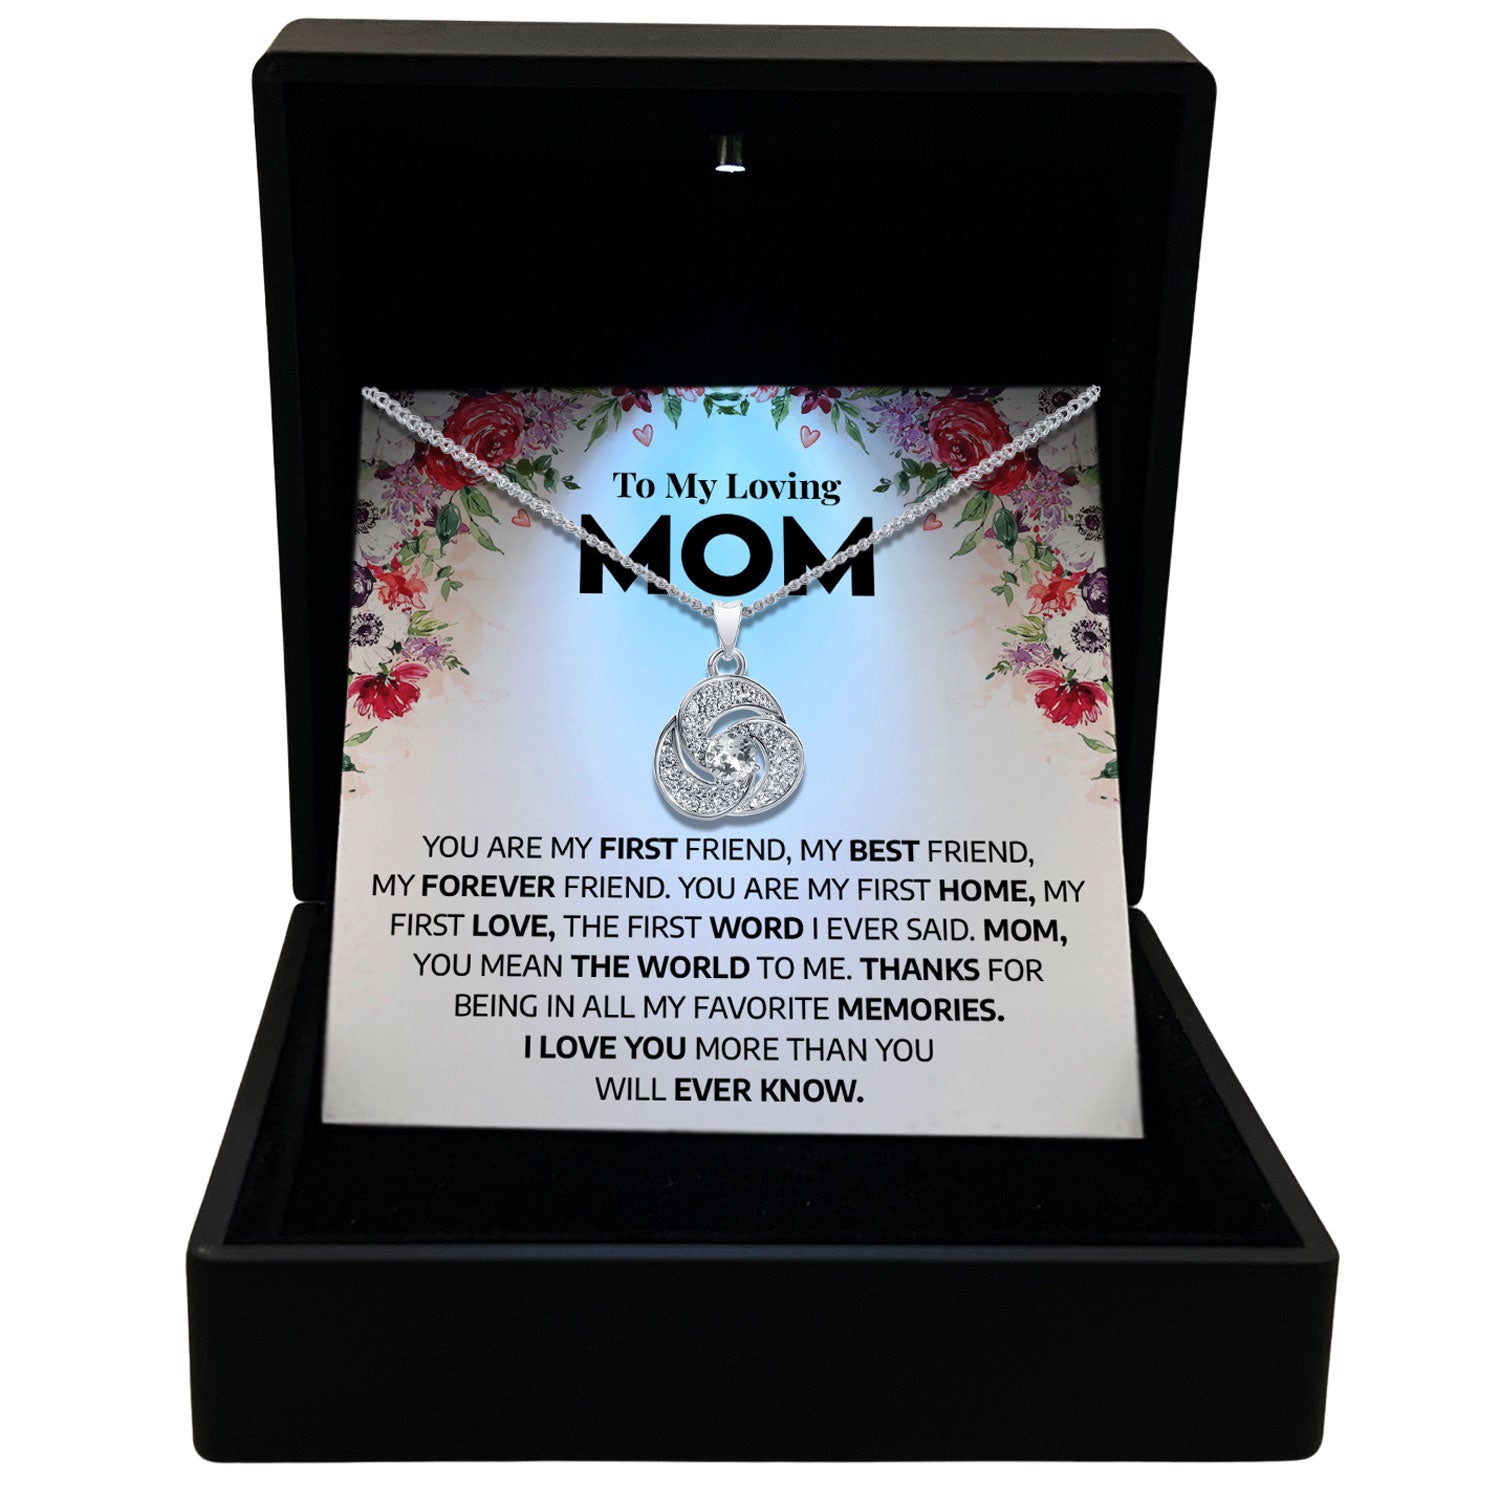 To My Loving Mom - Thanks For Being In All My Favorite Memories - Tryndi Love Knot Necklace